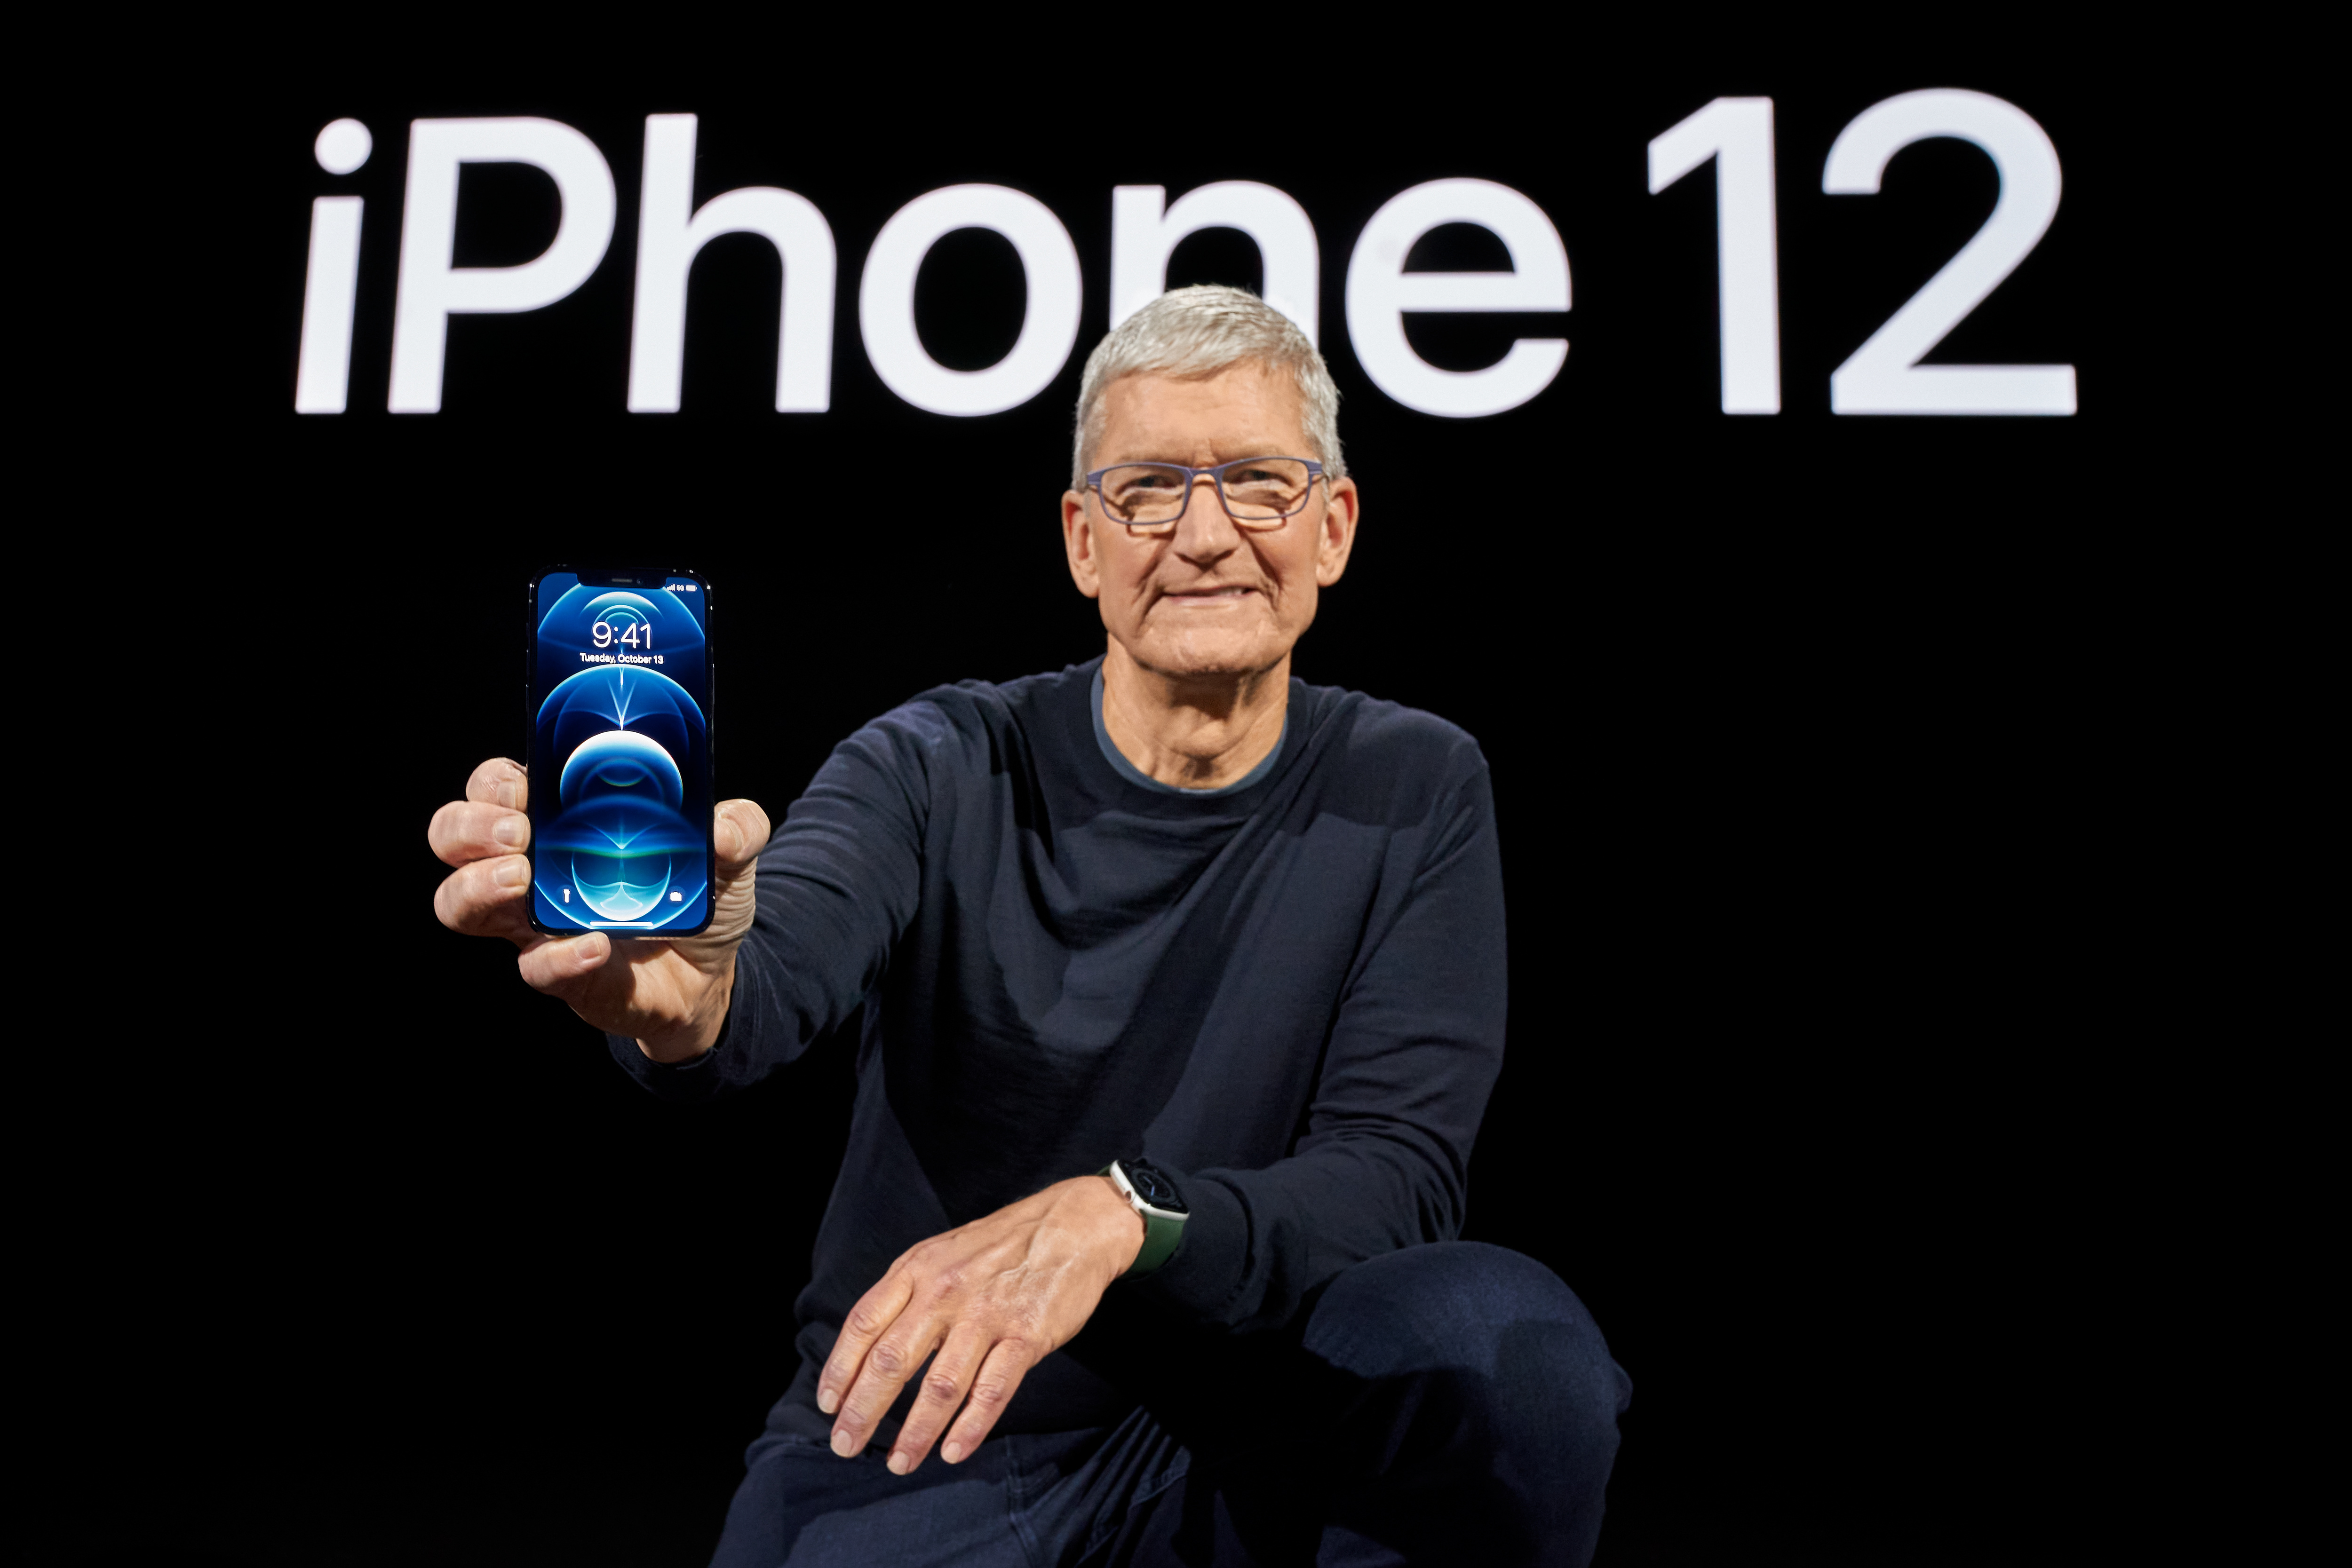 Apple boss Tim Cook showcasing the all-new iPhone 12 Pro at Apple Park in Cupertino, California